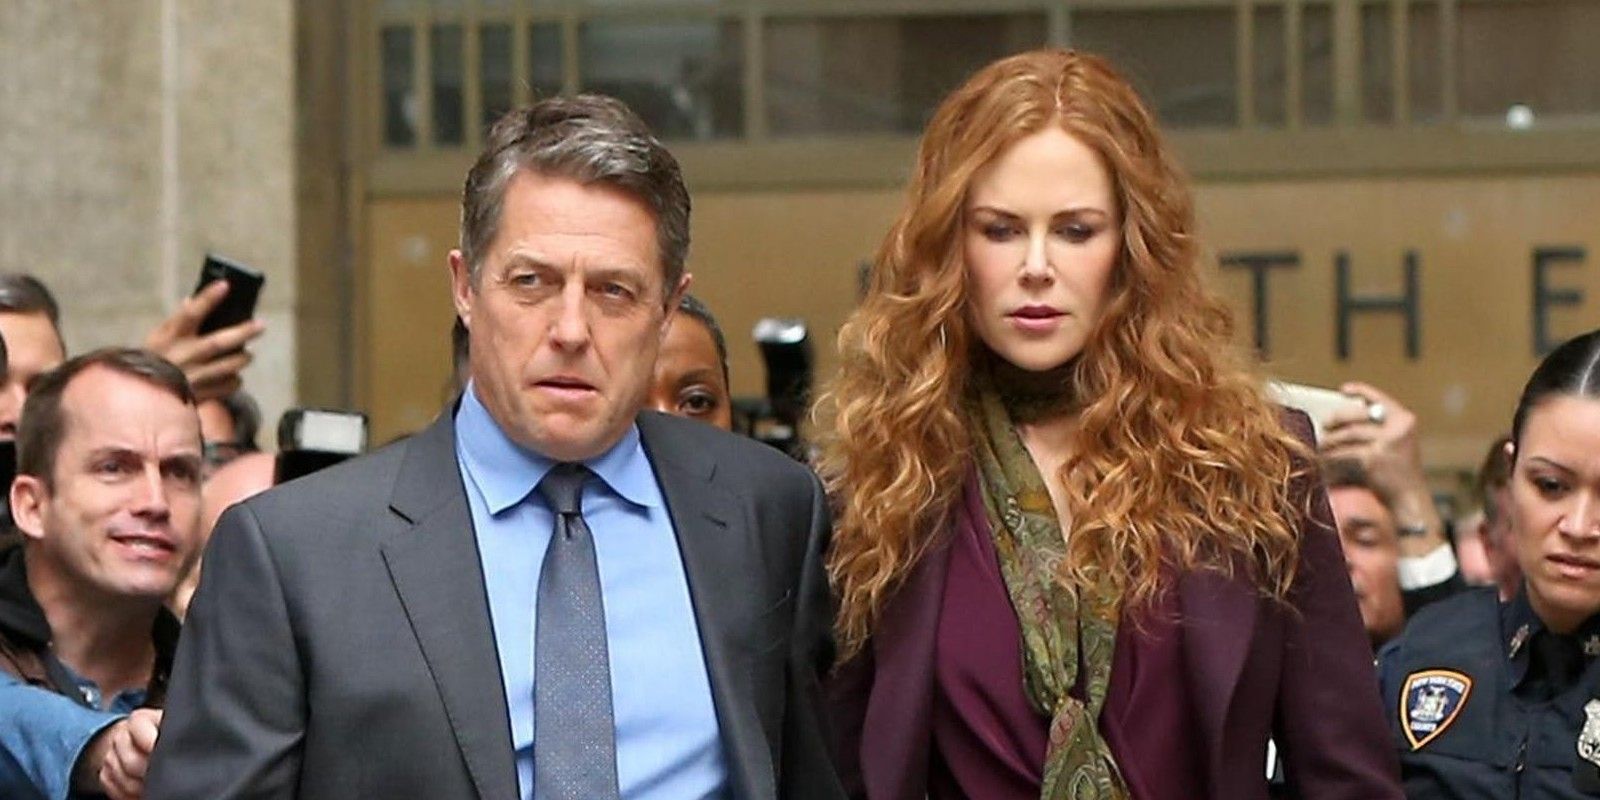 The Undoing review: Glossy Nicole Kidman and Hugh Grant drama struggles to  reconcile satire with a traditional thriller